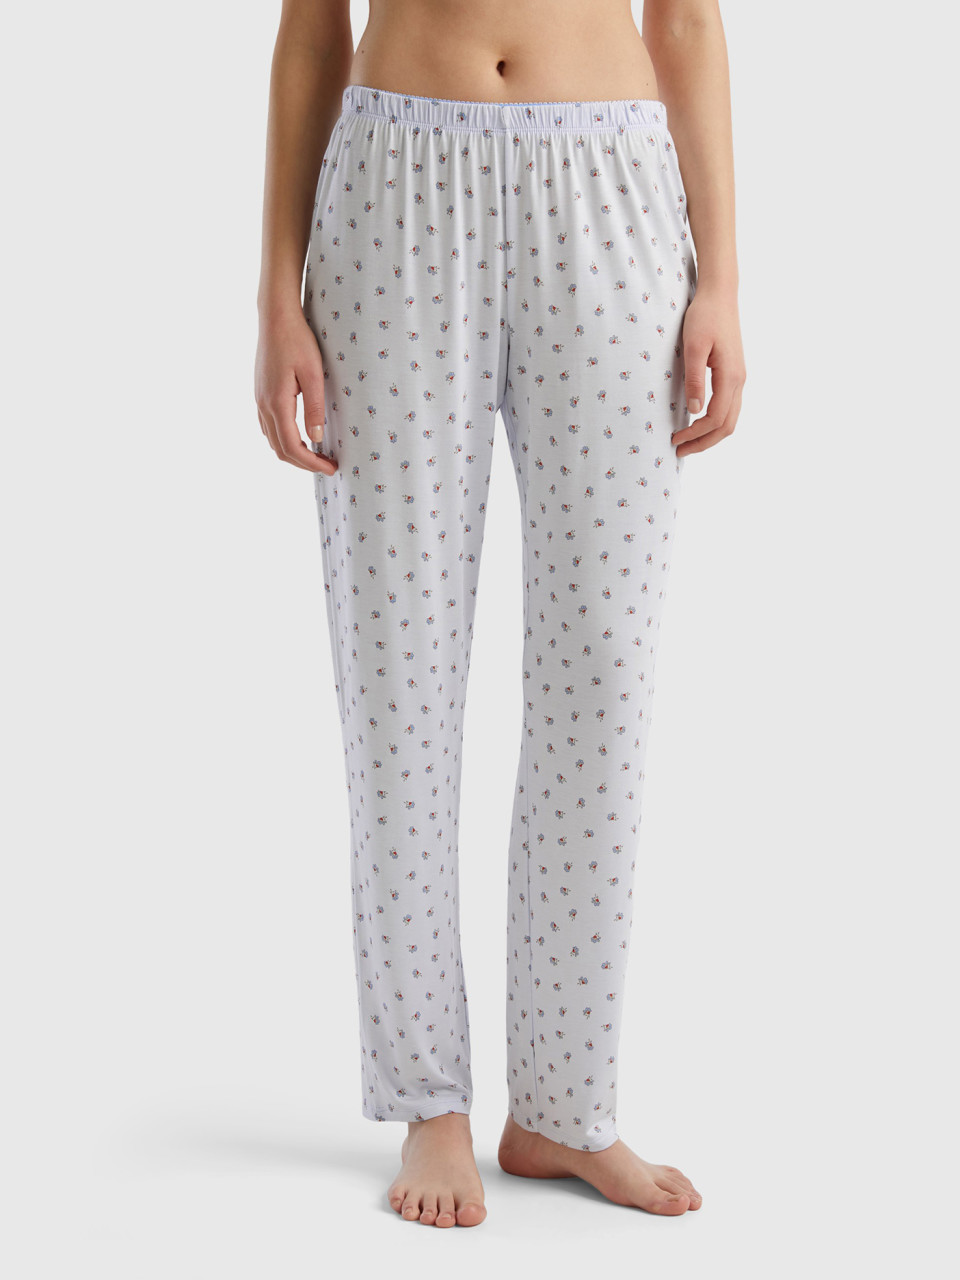 Benetton, 3/4 Floral Bottoms In Sustainable Viscose, White, Women